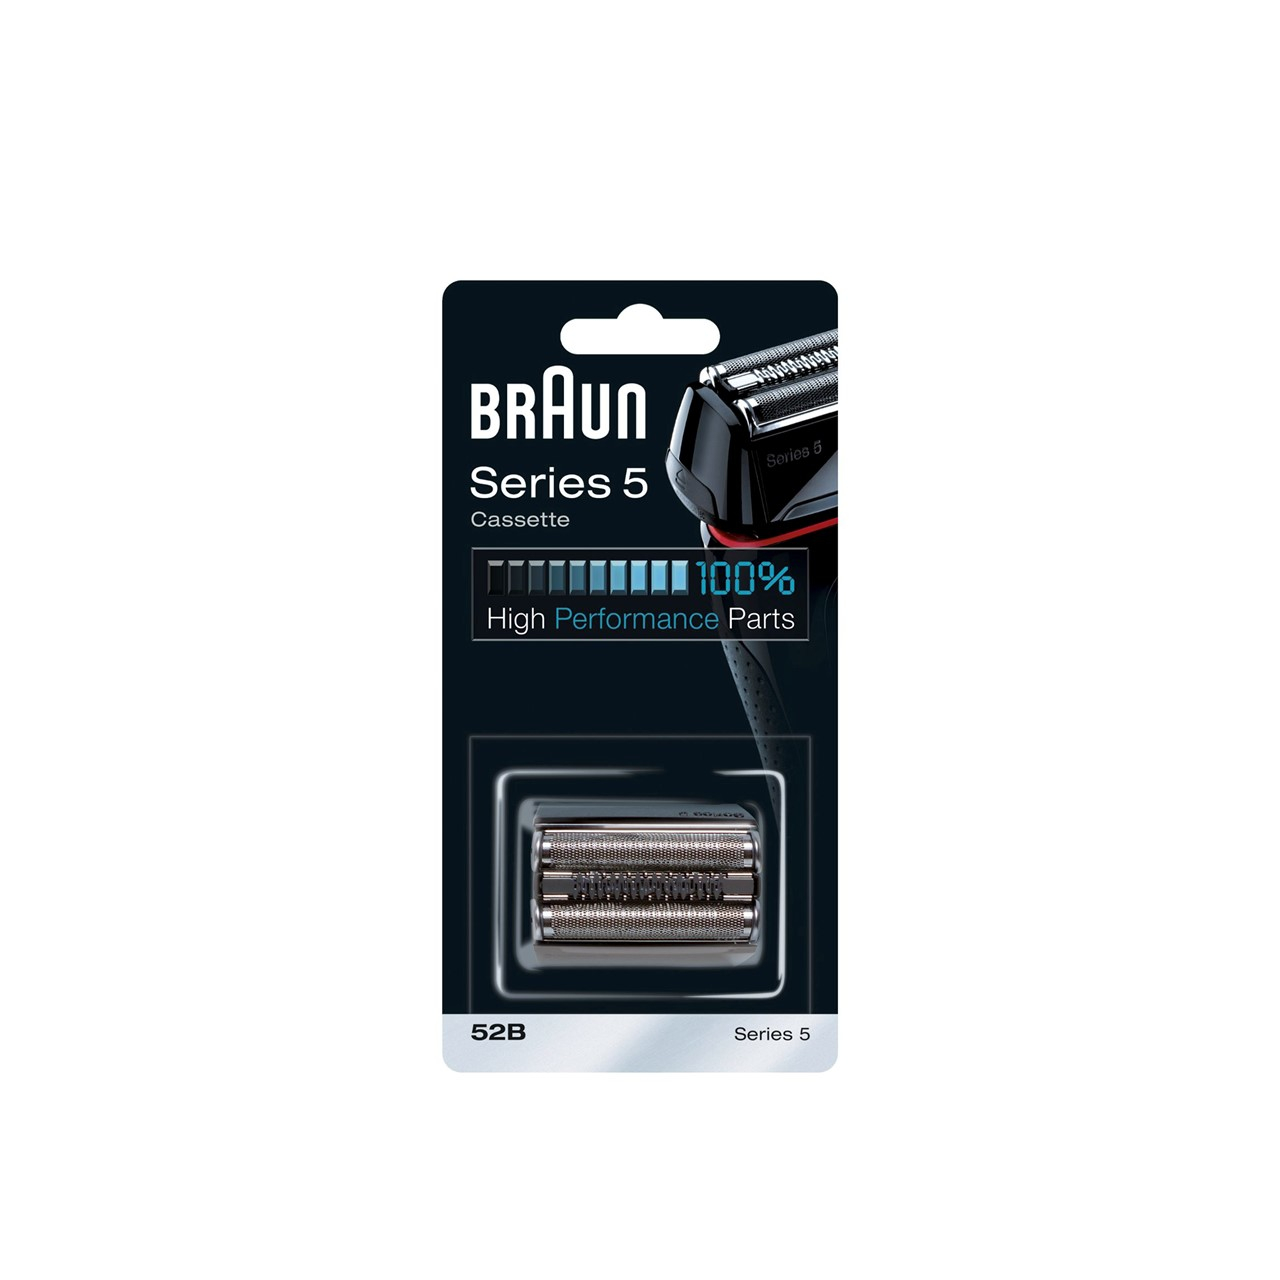 For Braun Series 5 Braun Shaver 52b Electric Shaver Replacement